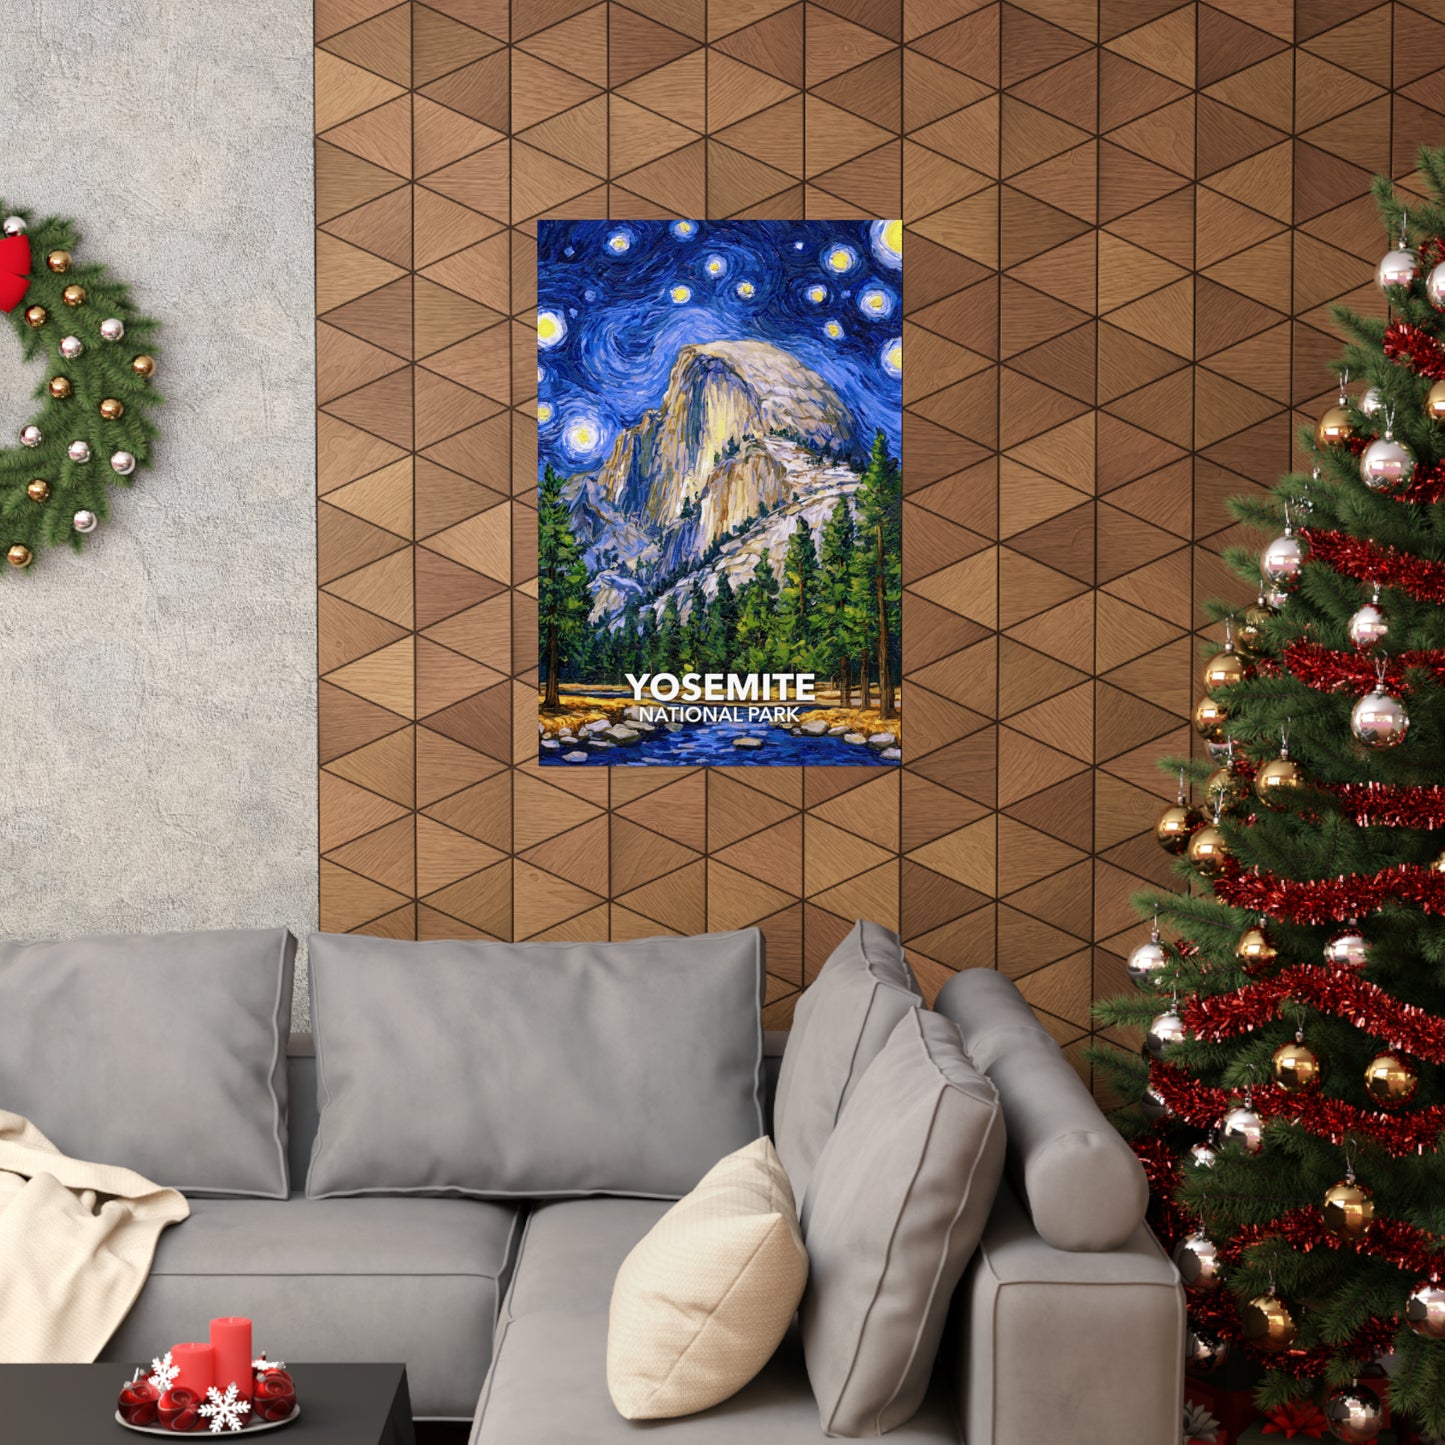 Yosemite National Park Poster - The Starry Night